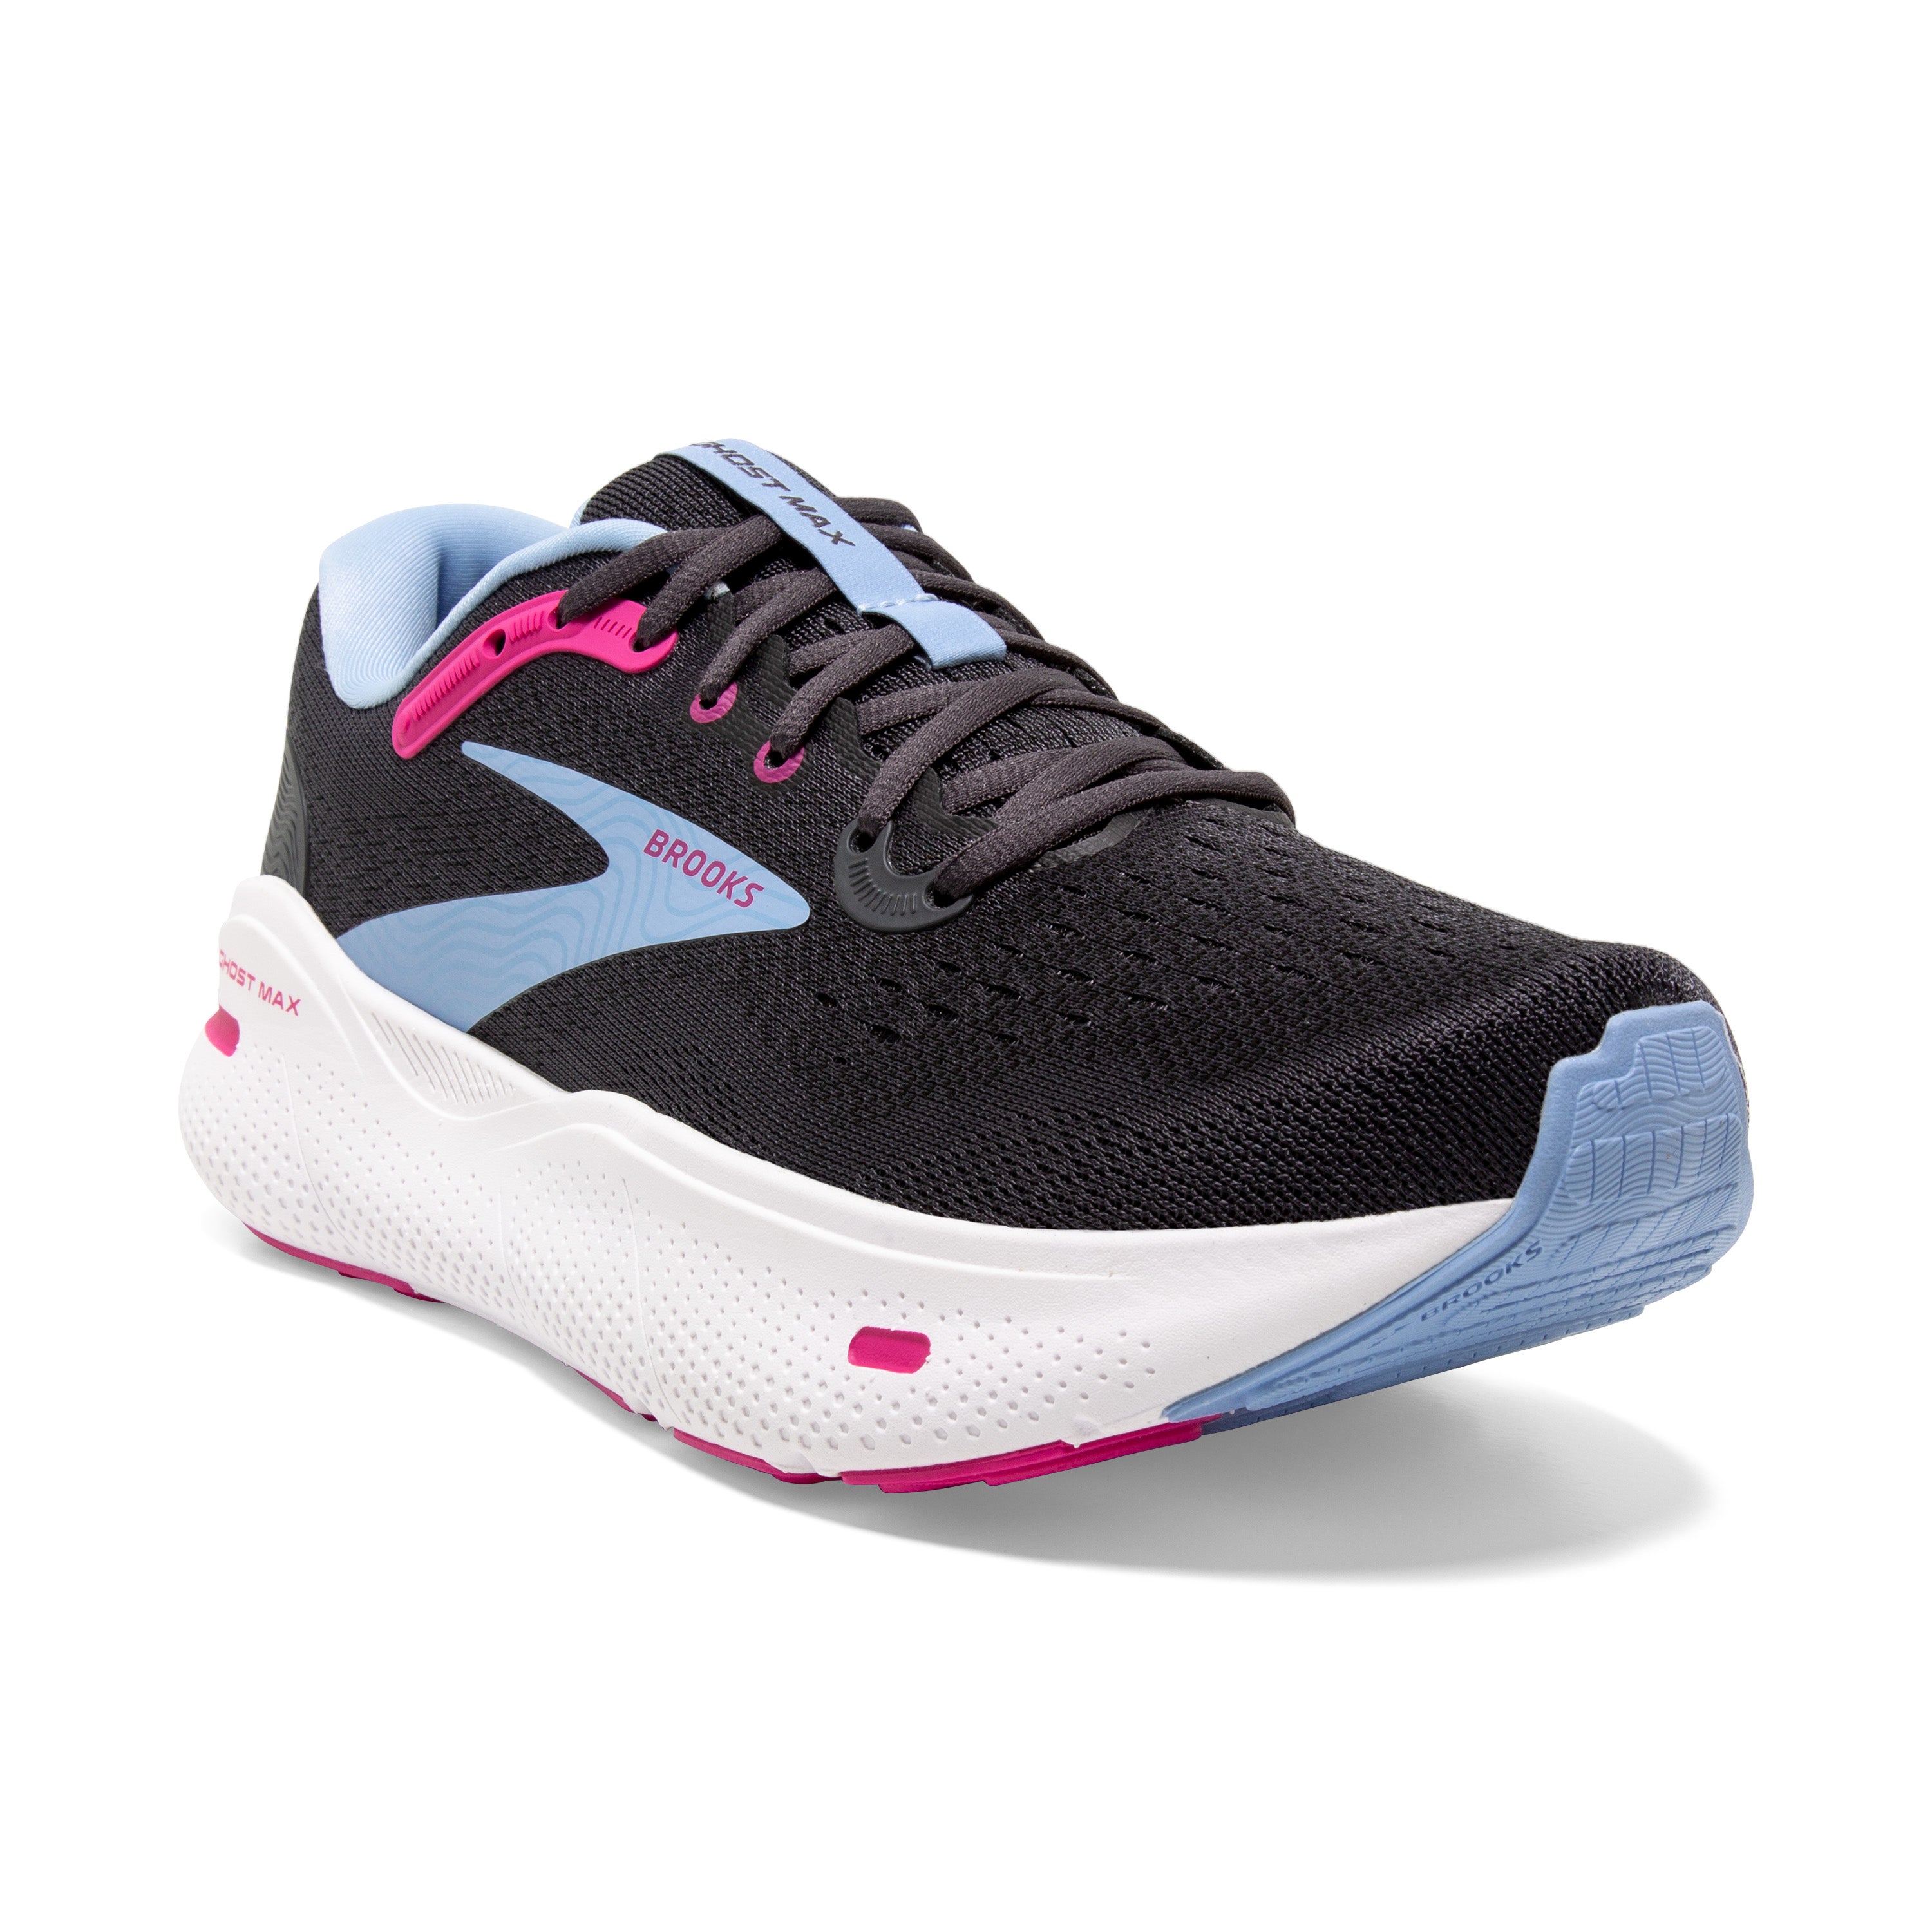 Ghost Max - Women's Road Running Shoes